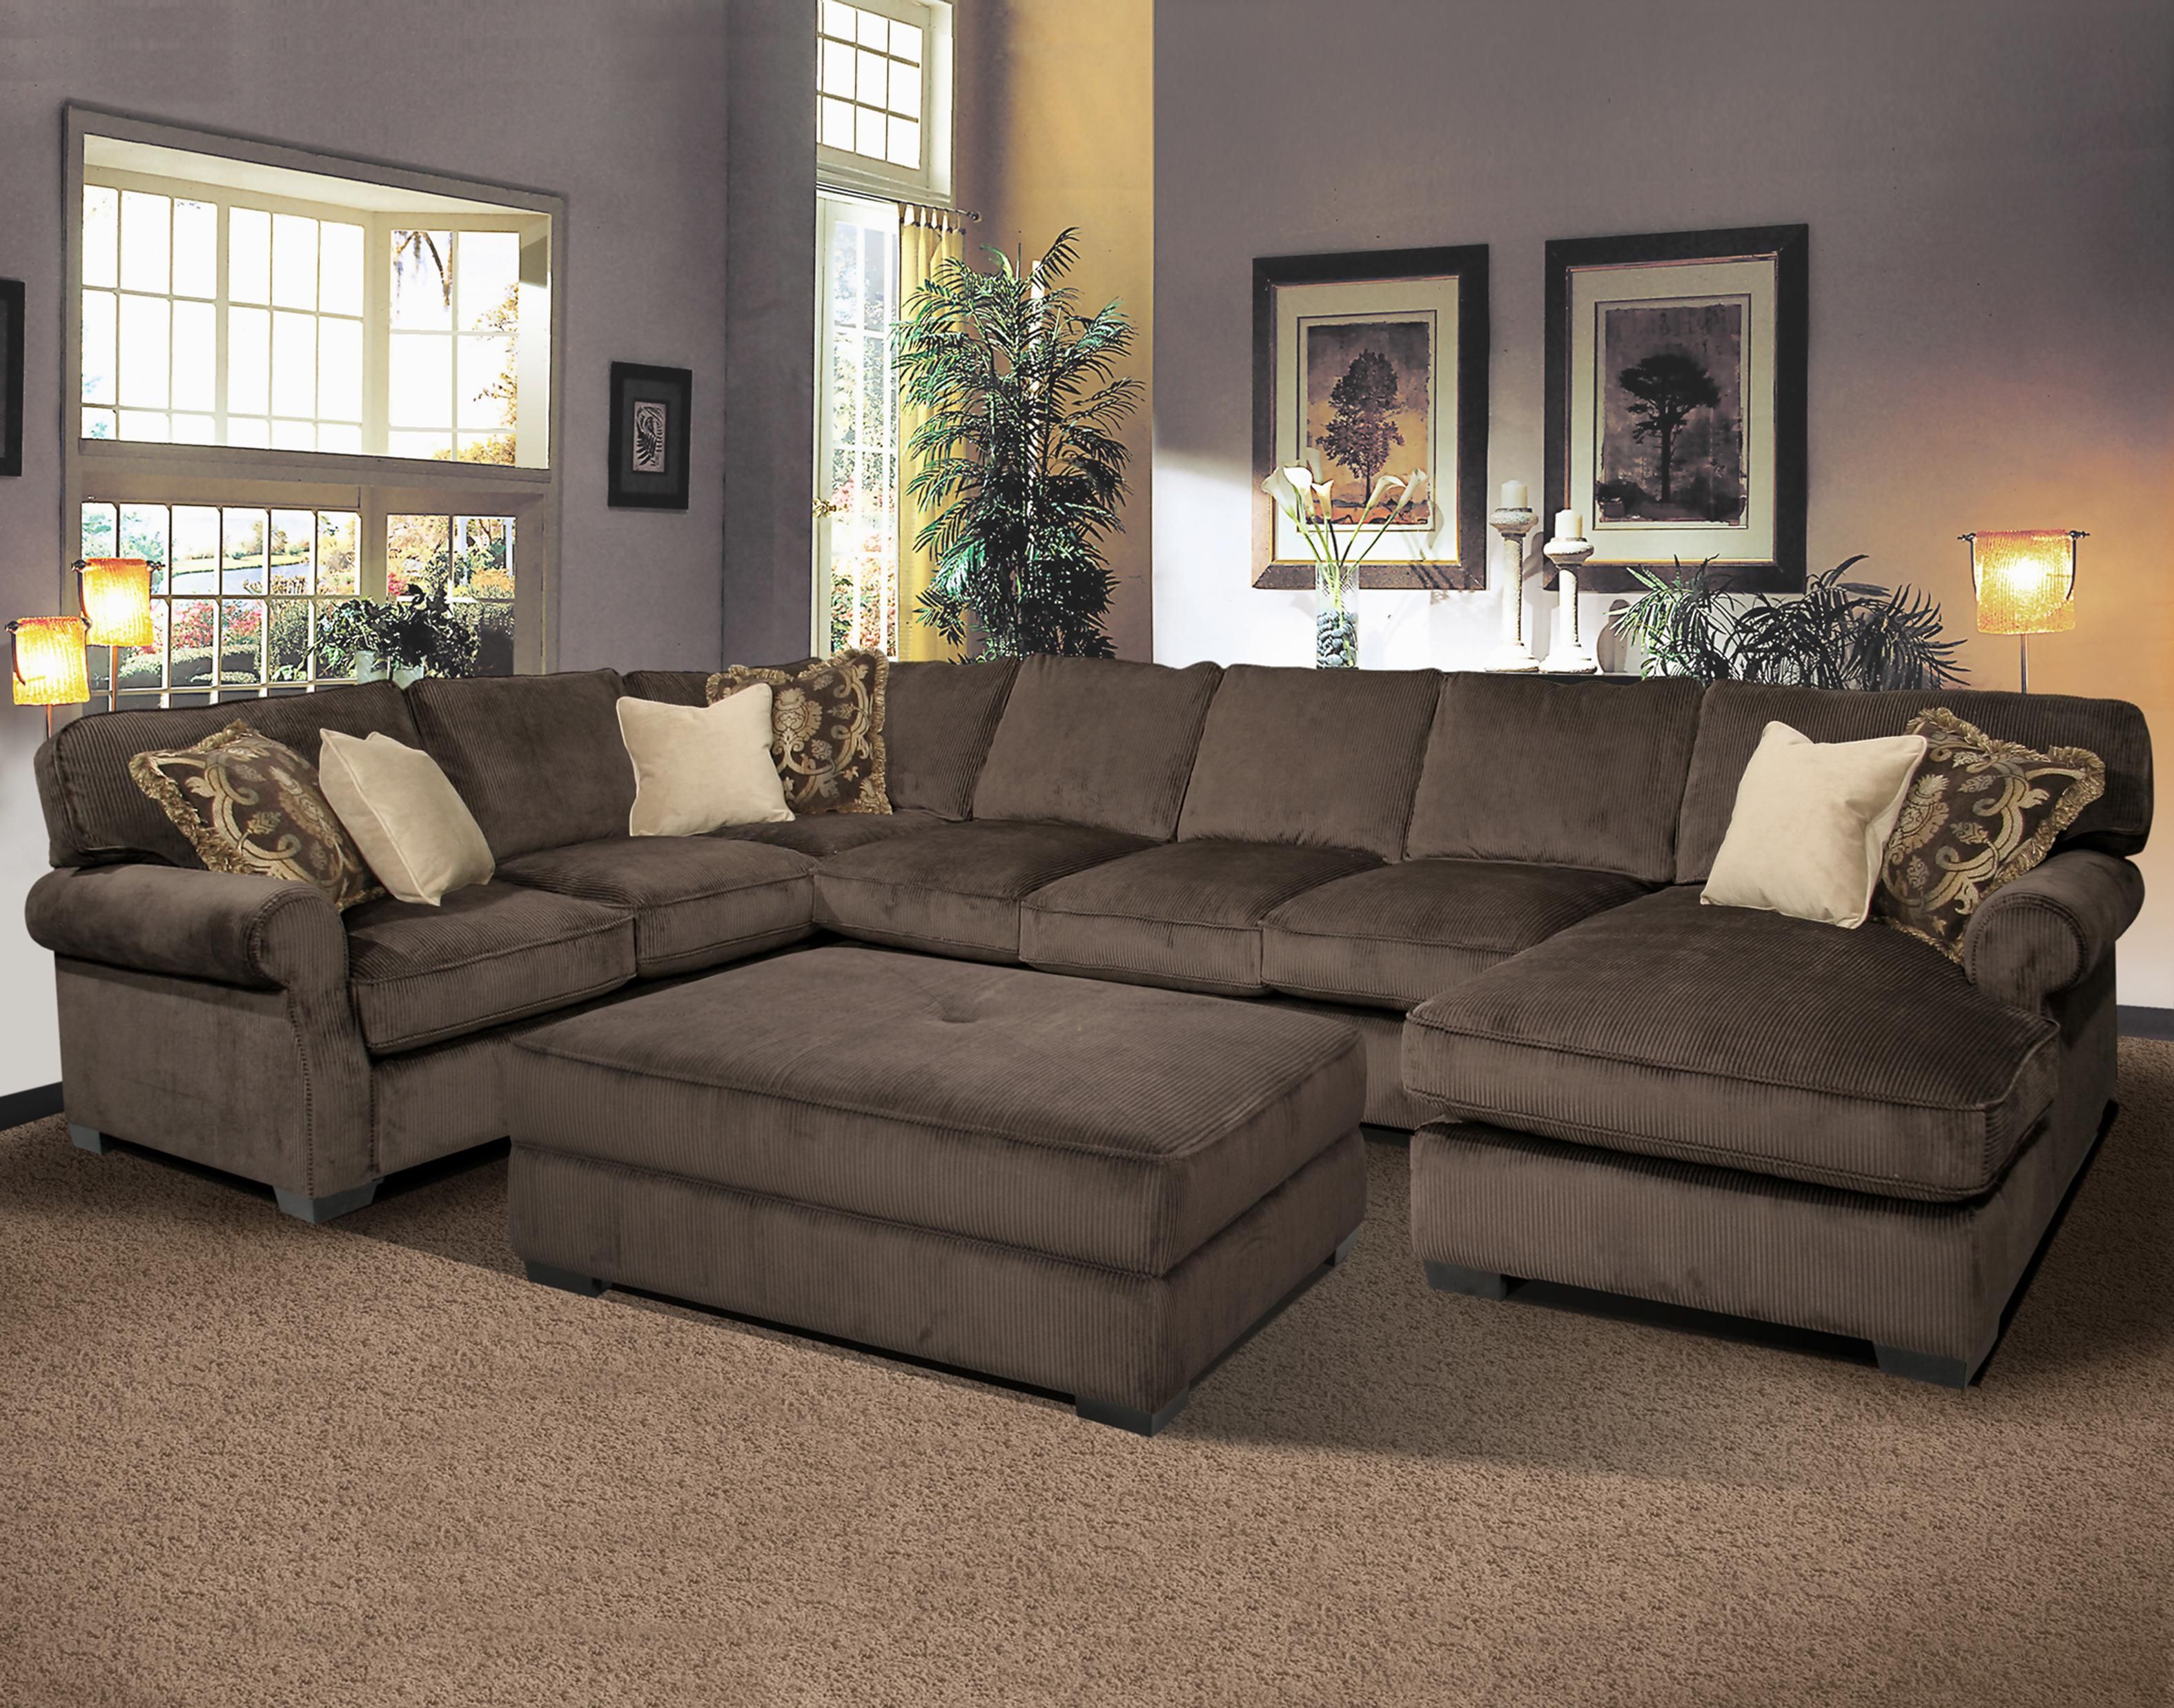 Best 25 Comfy Sectional Ideas On Pinterest Pertaining To Comfortable Sectional Sofa (View 2 of 15)